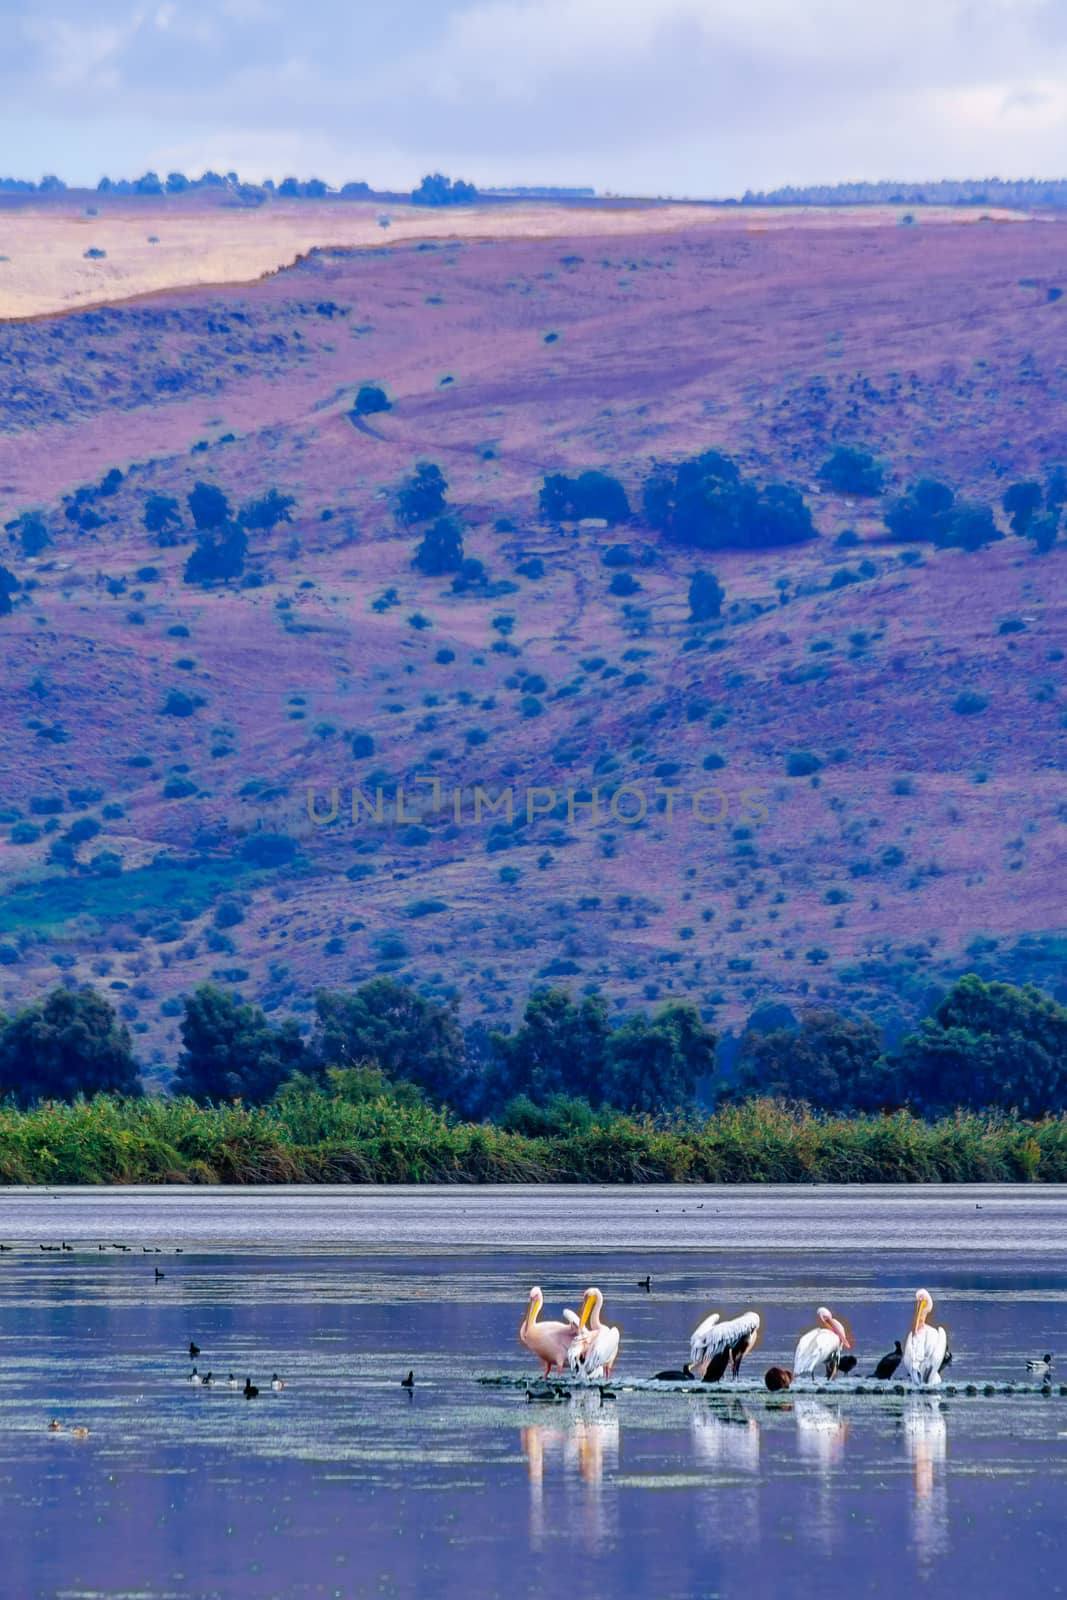 View of Pelicans, and other birds, with wetland landscape, in the Hula nature reserve, northern Israel